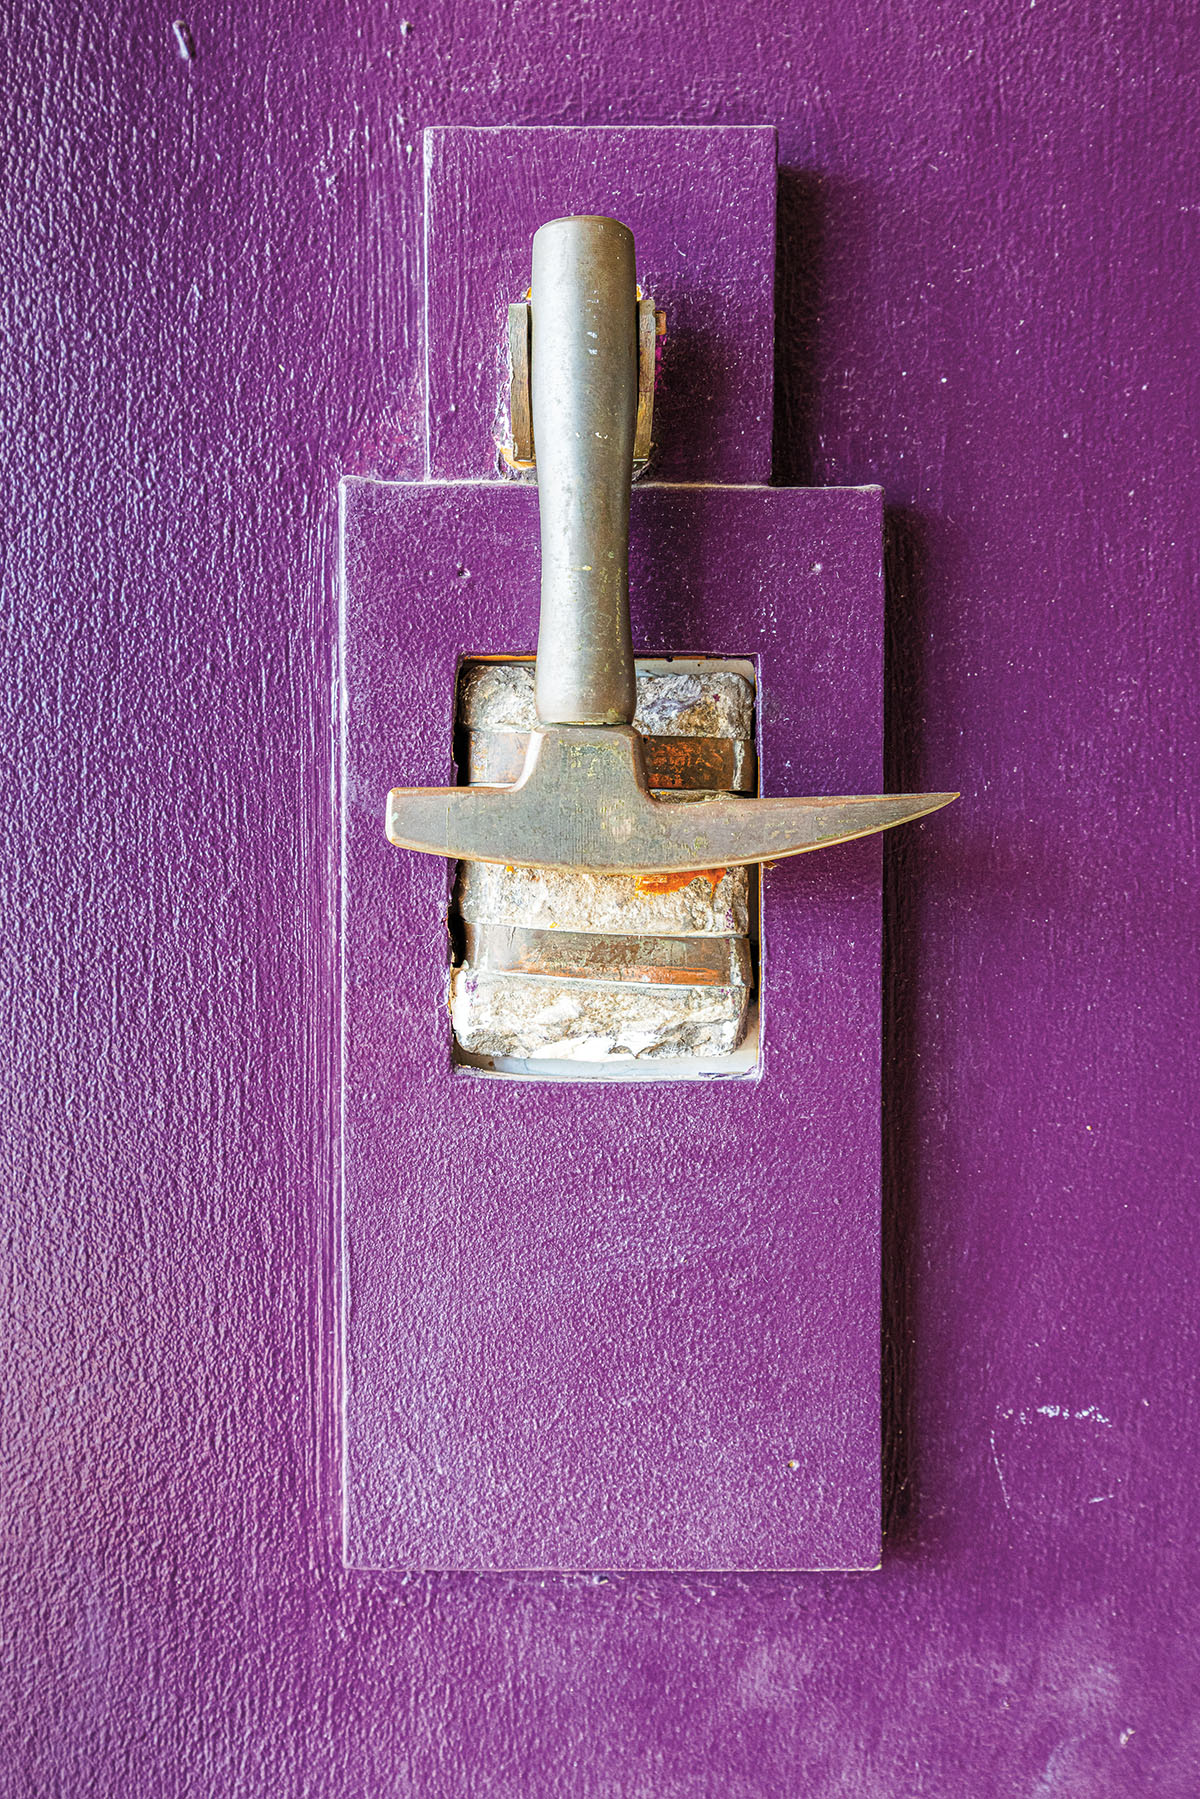 A silver tool hanging from a purple door